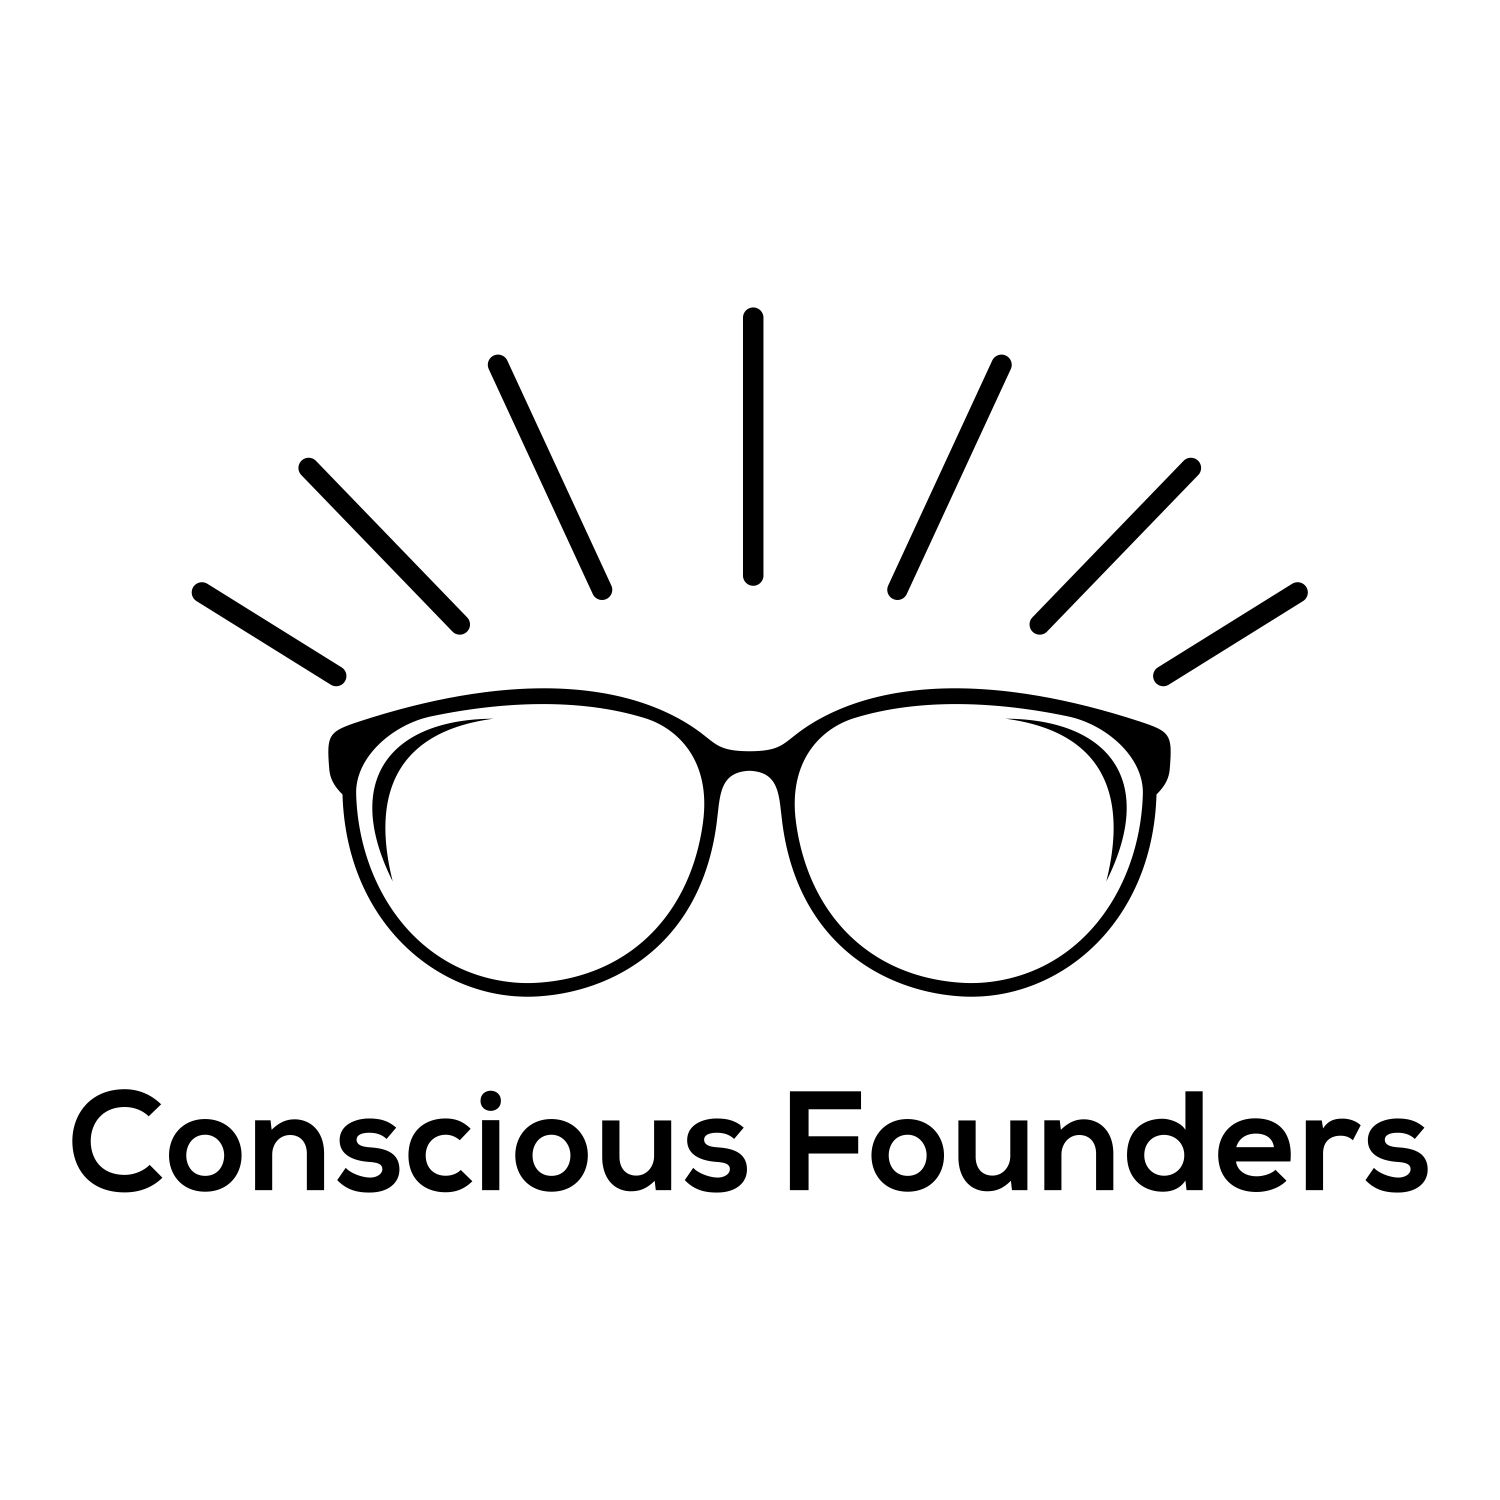 Conscious Founders